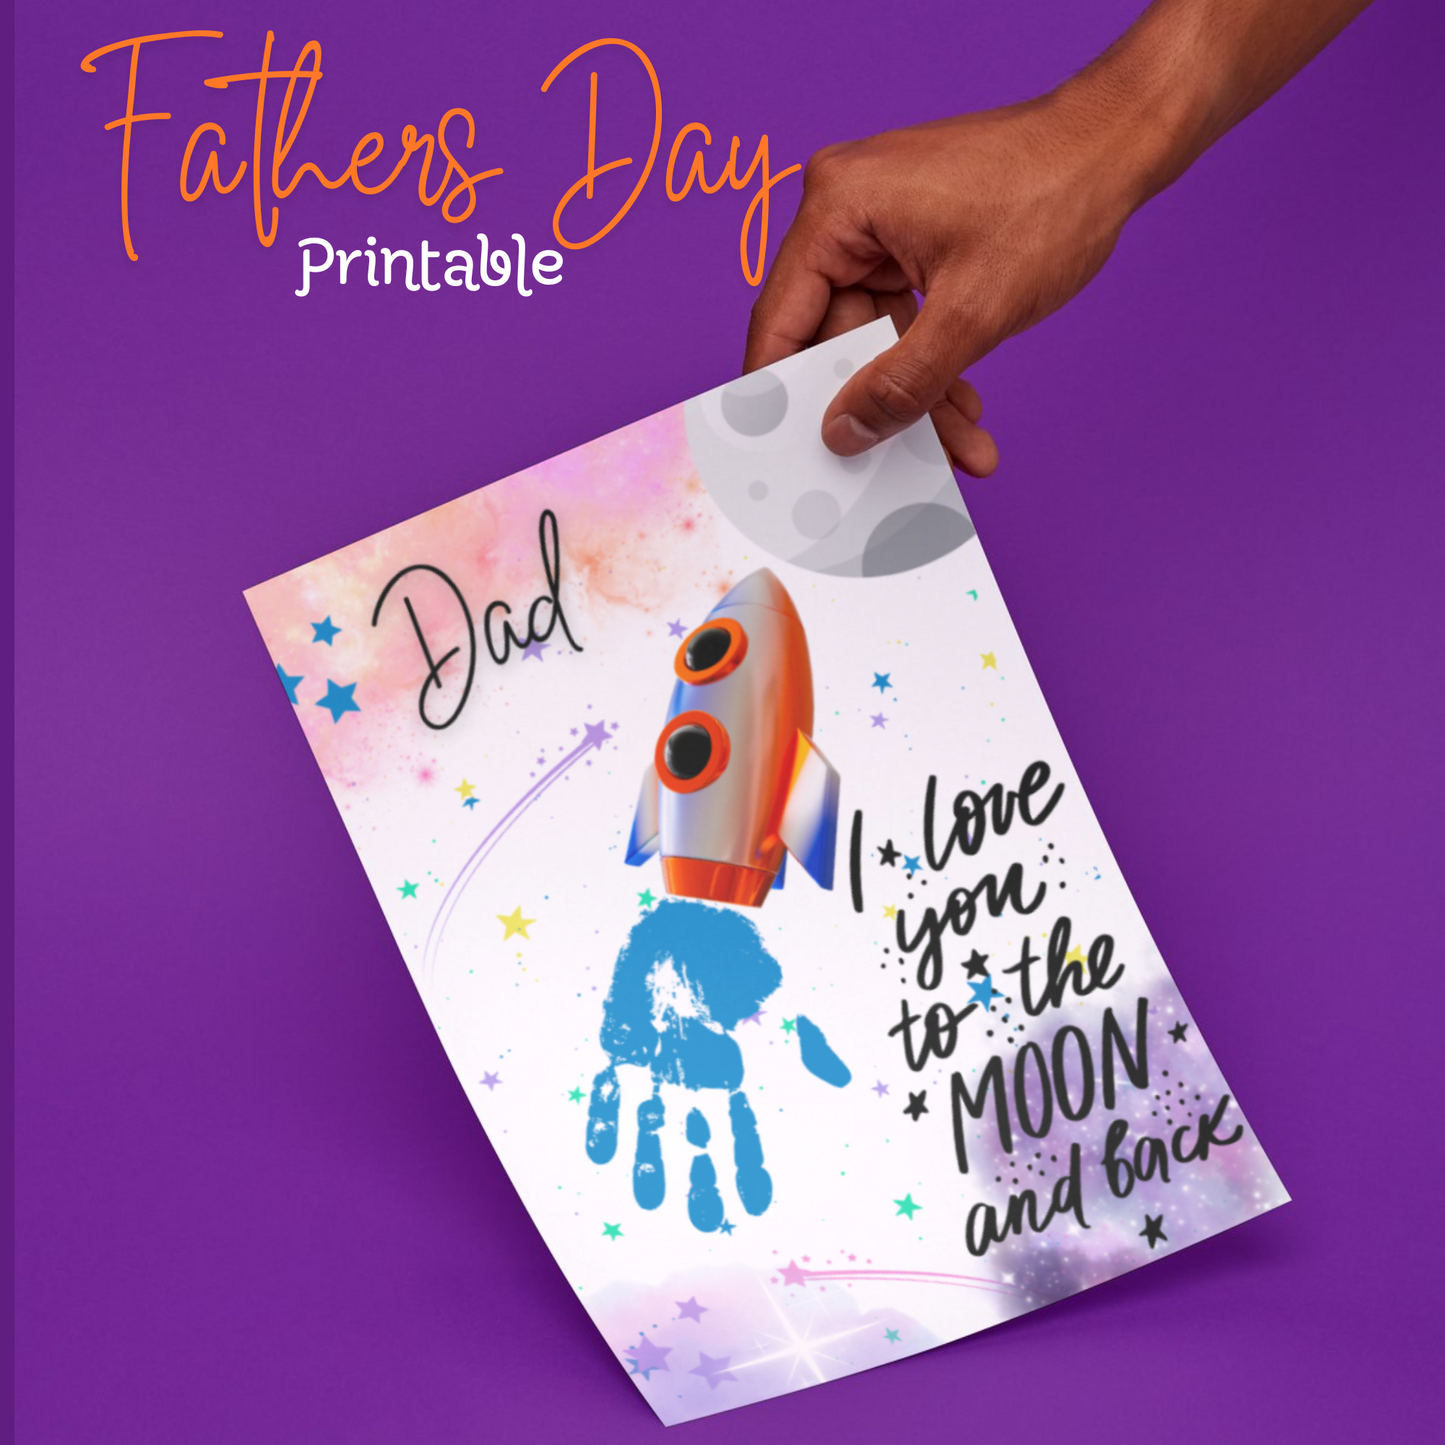 Father's Day Personalized Handprint Wall Art Digital Printout/ Hand Print/ Kids gift to Father/ Bonus Dad/ Uncle/ Grandpa/ Print and Paint